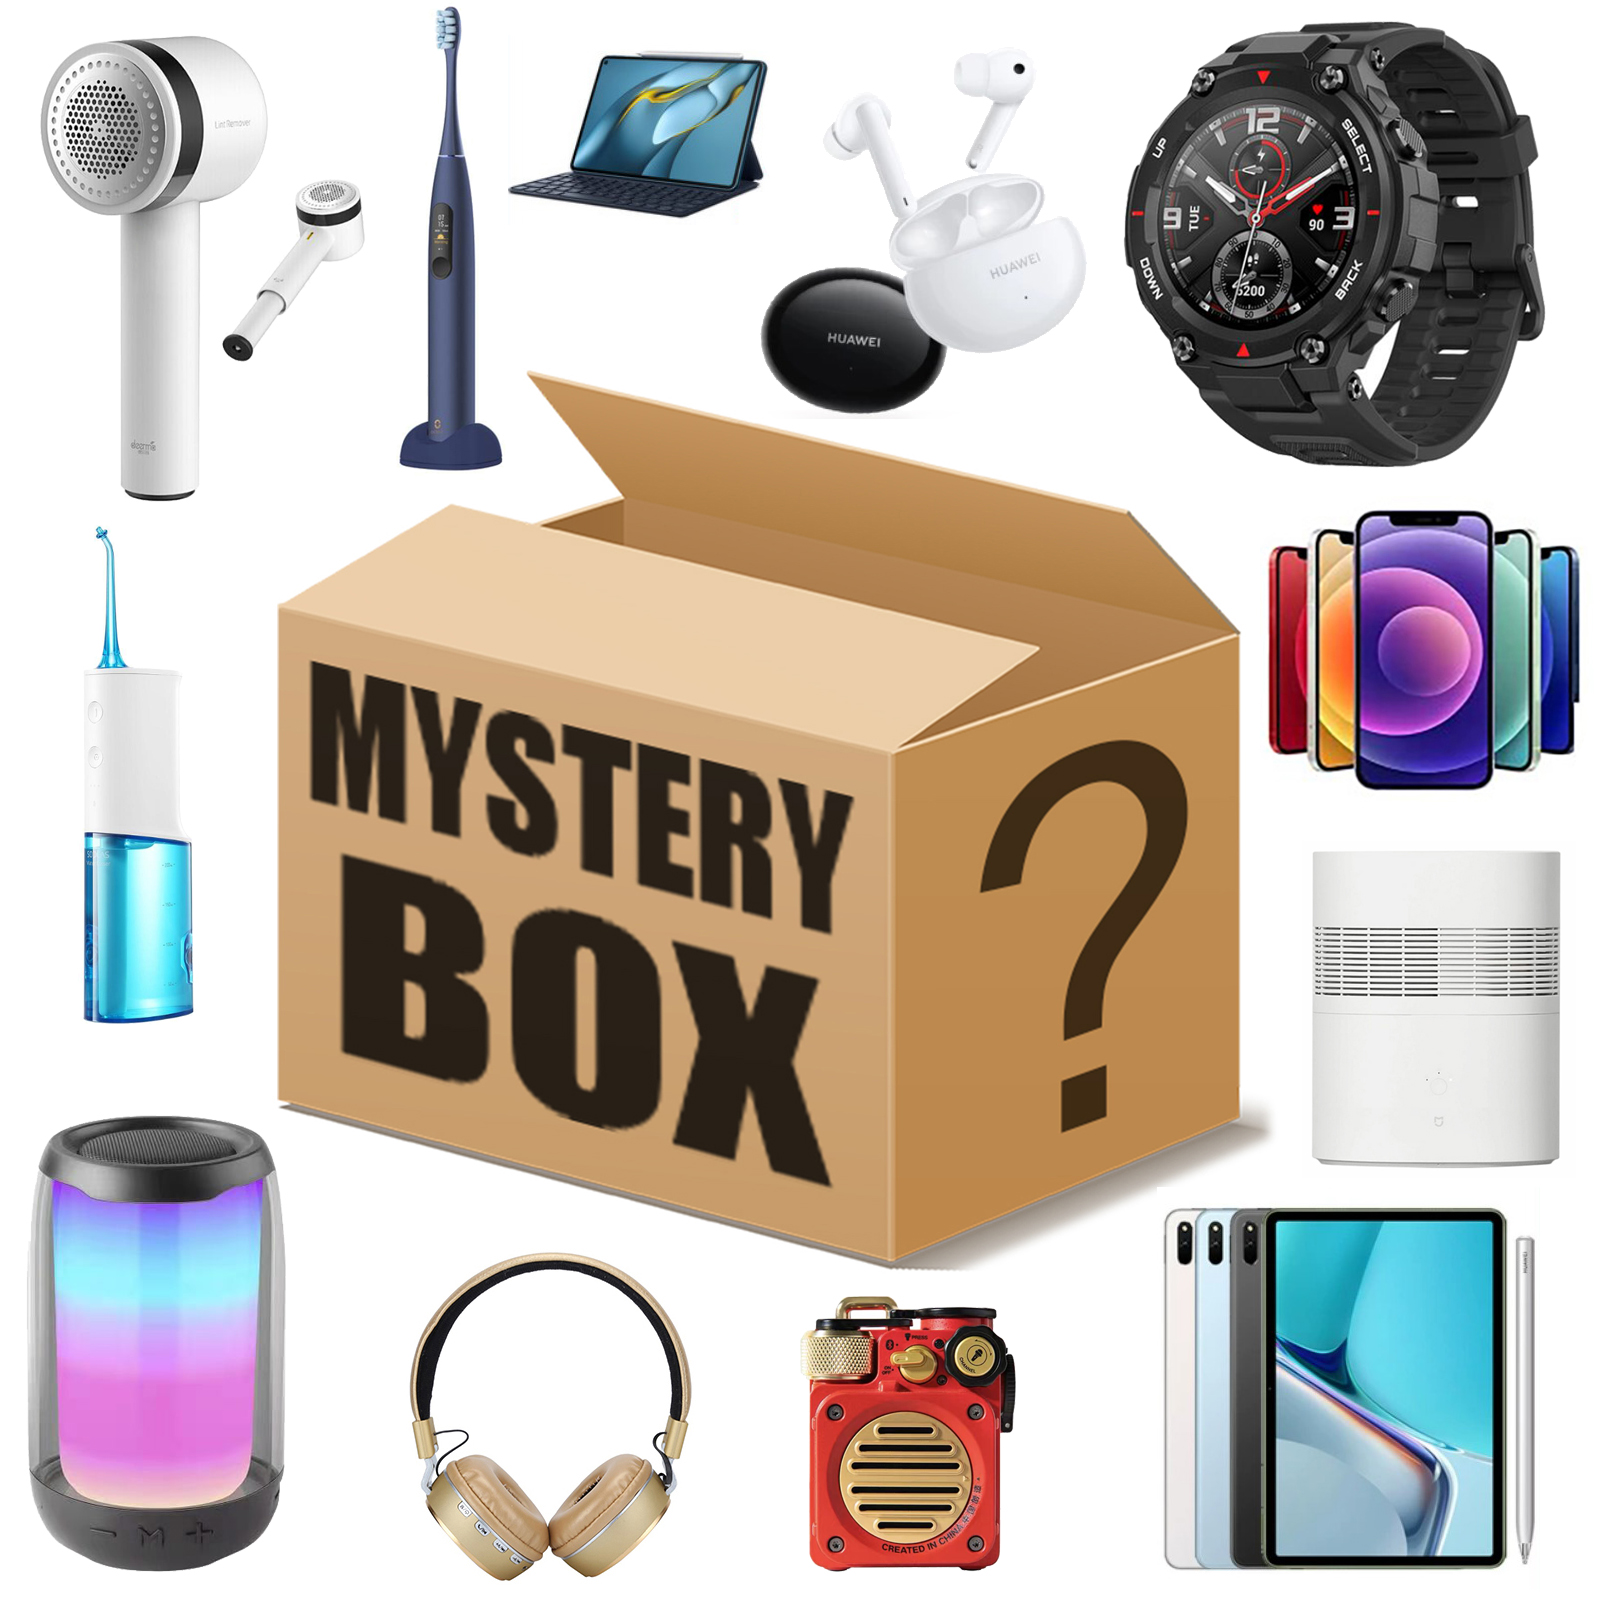 

091501 Electronics Earphones Luxury Gifts Lucky Boxes One Random Mystery Blind Box Gift for Holidays / Birthday Value More Than $100, Mixed color